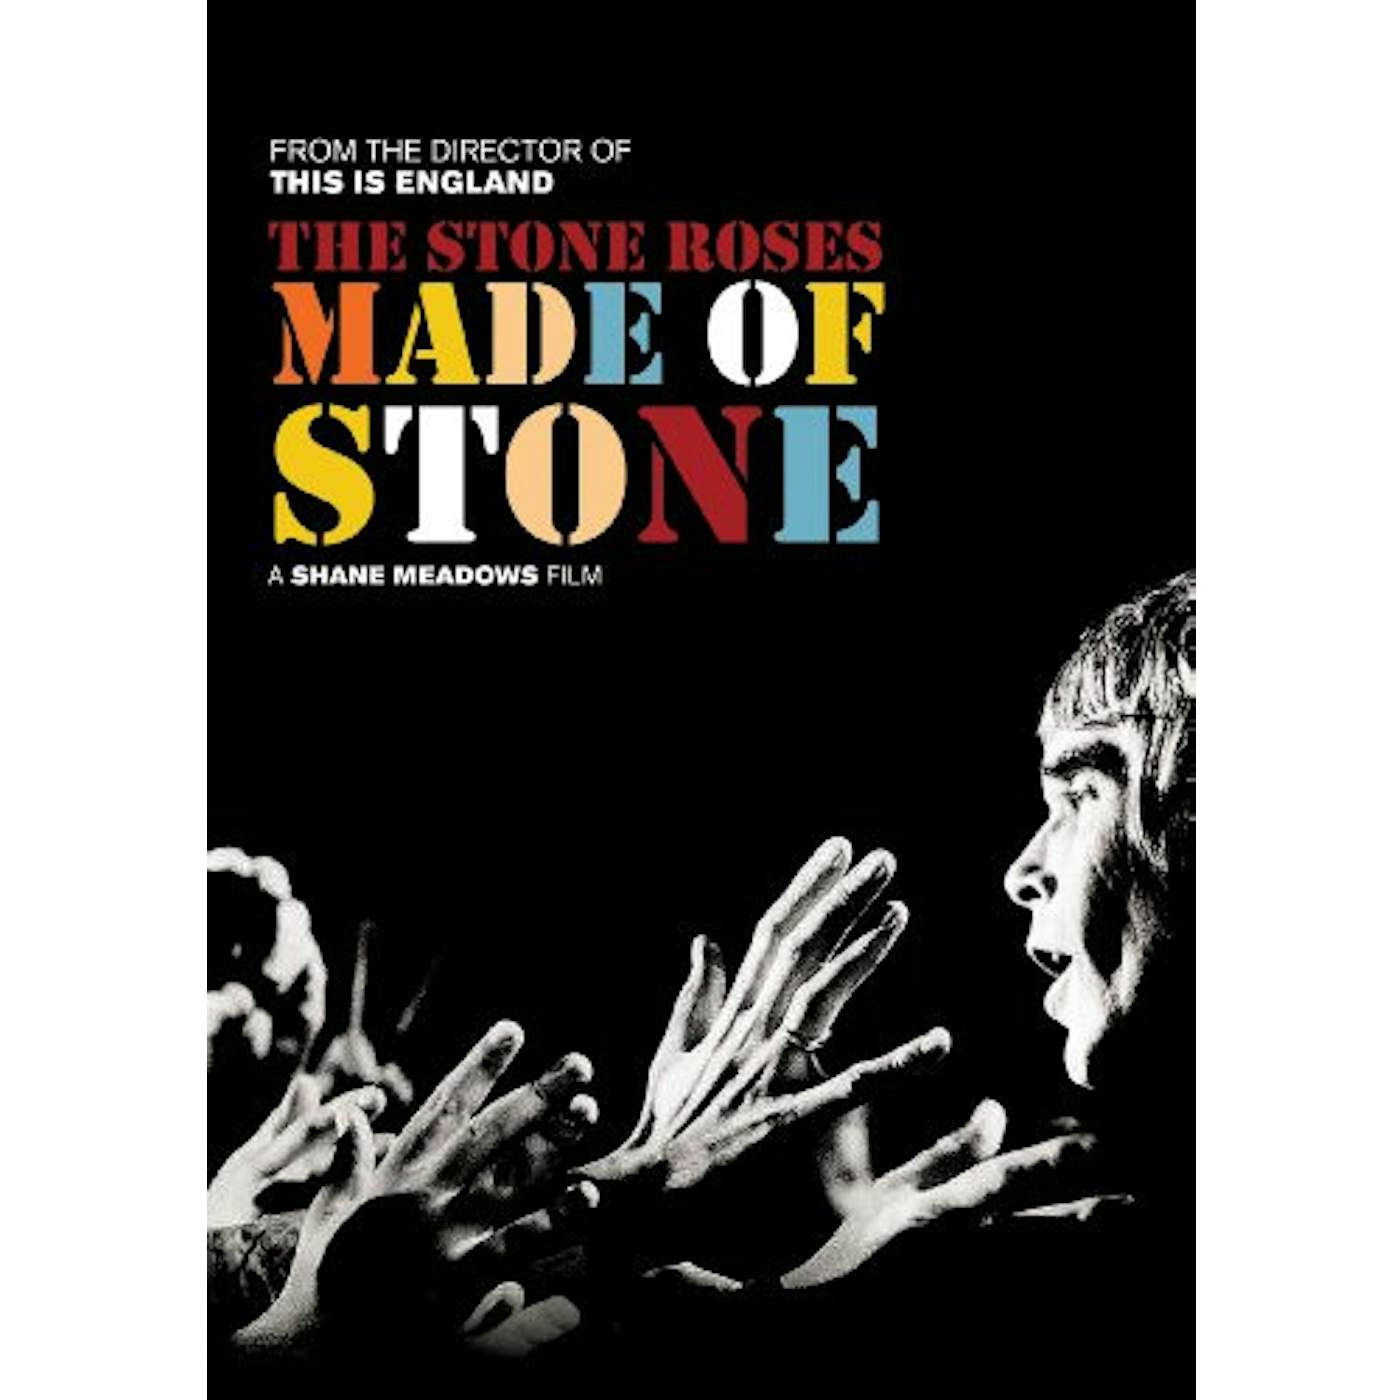 The Stone Roses MADE OF STONE Blu-ray